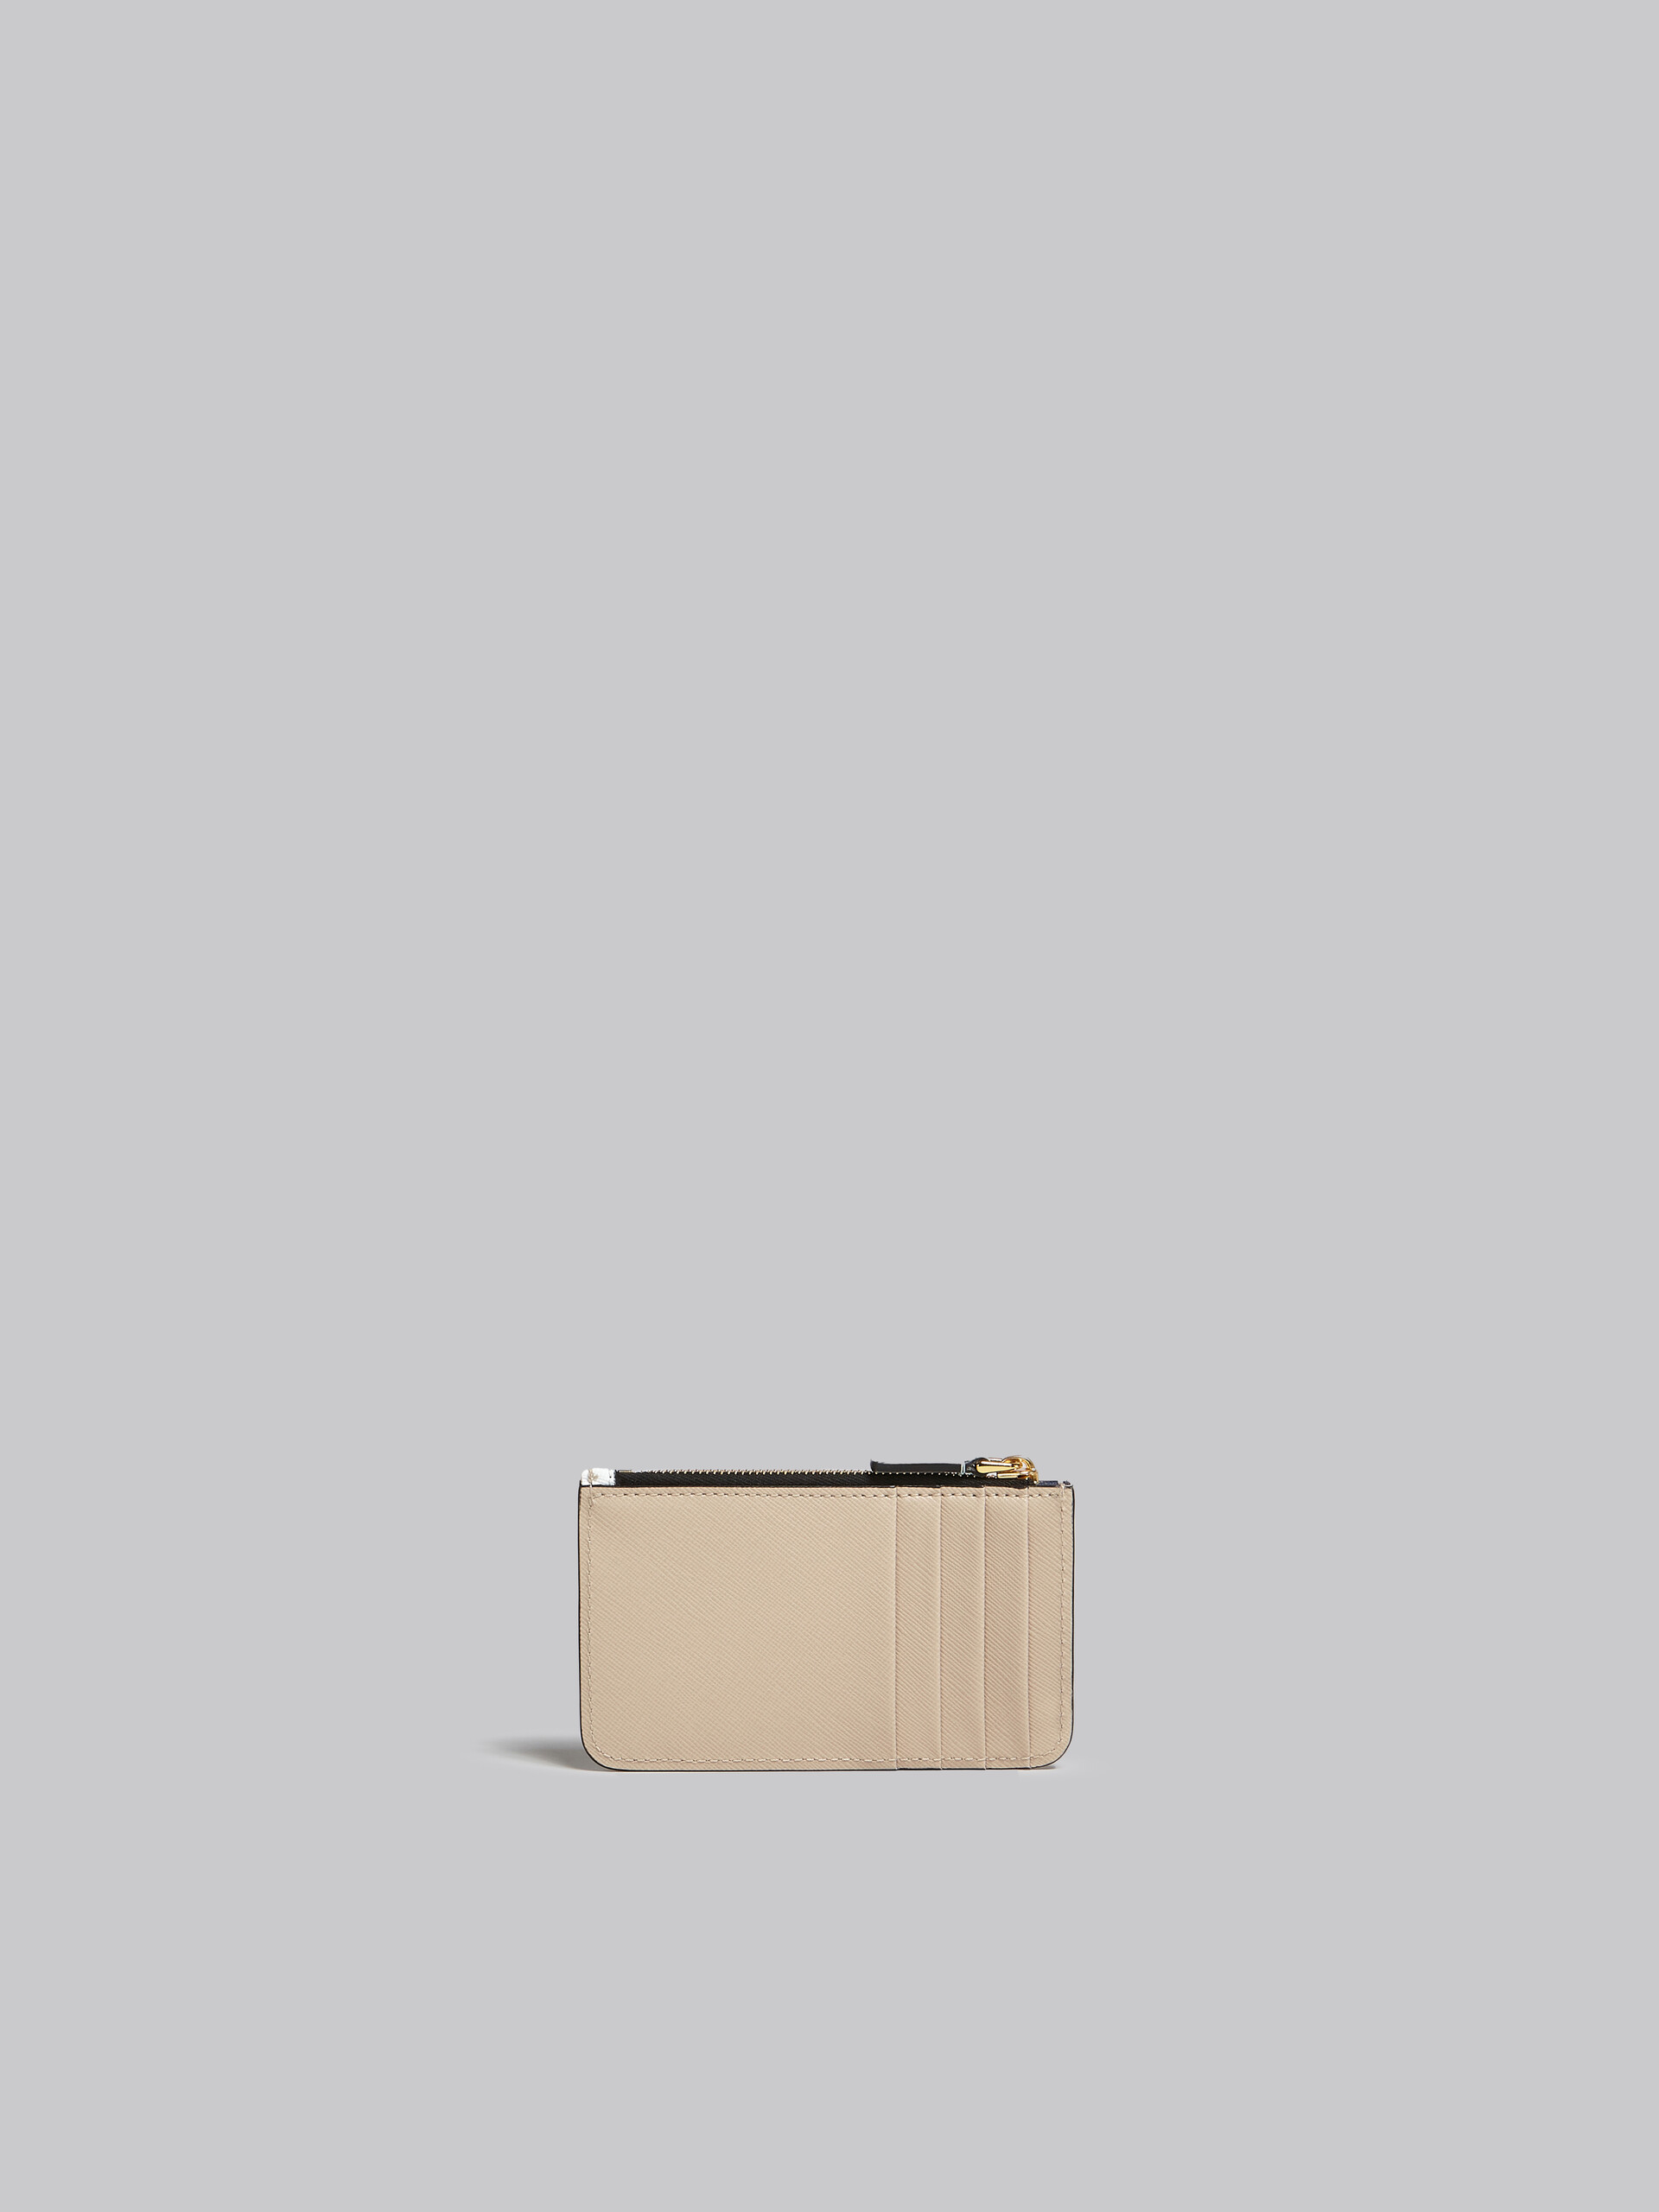 Light green white and brown saffiano leather card case